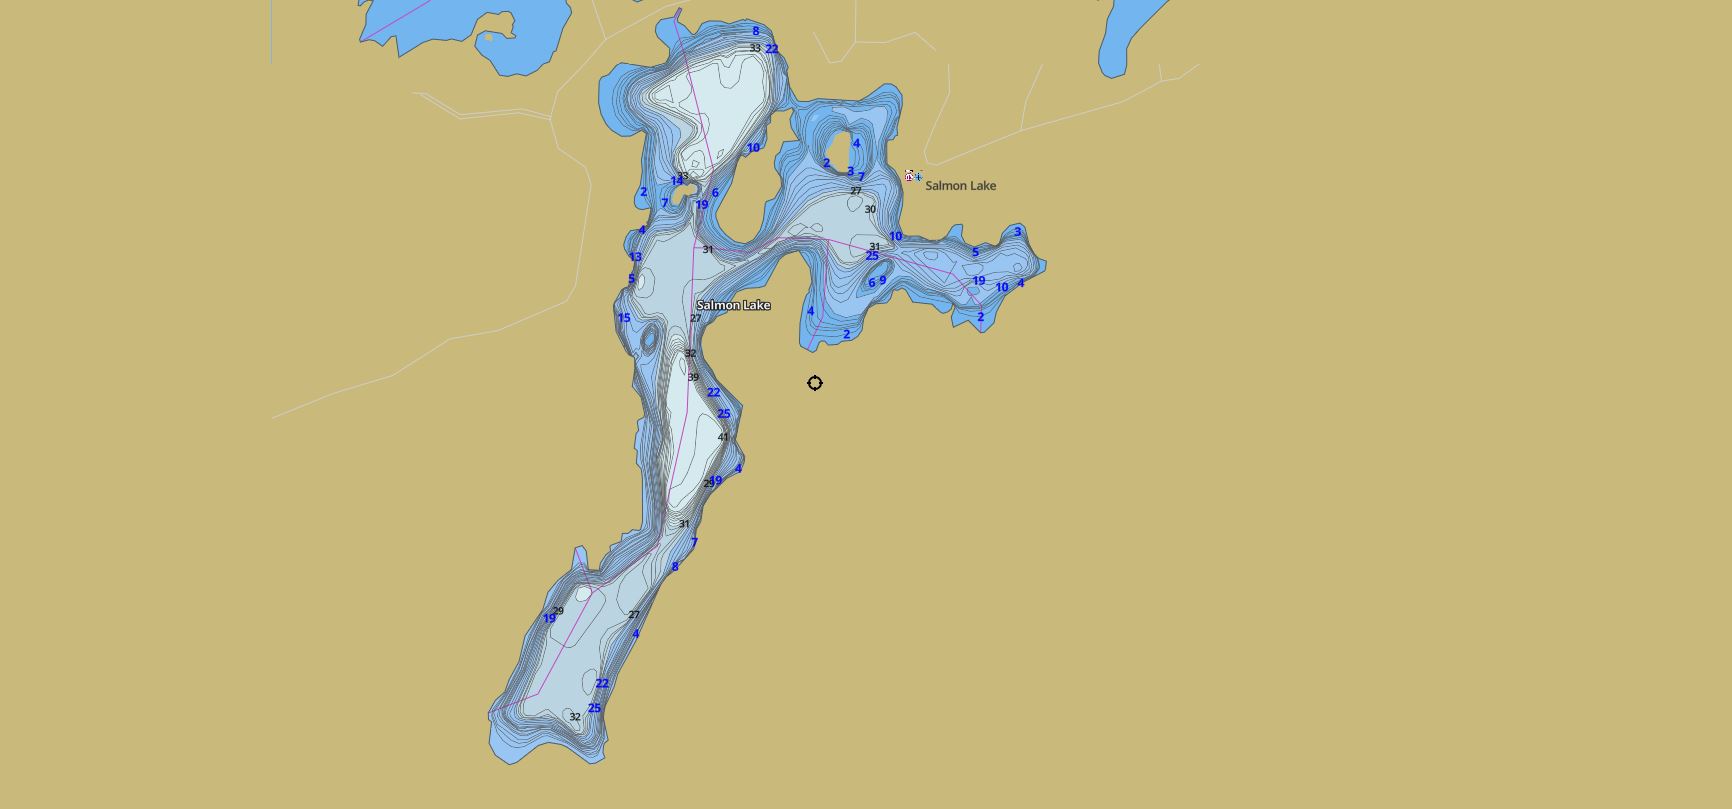 Contour Map of Salmon Lake in Municipality of Seguin and the District of Parry Sound